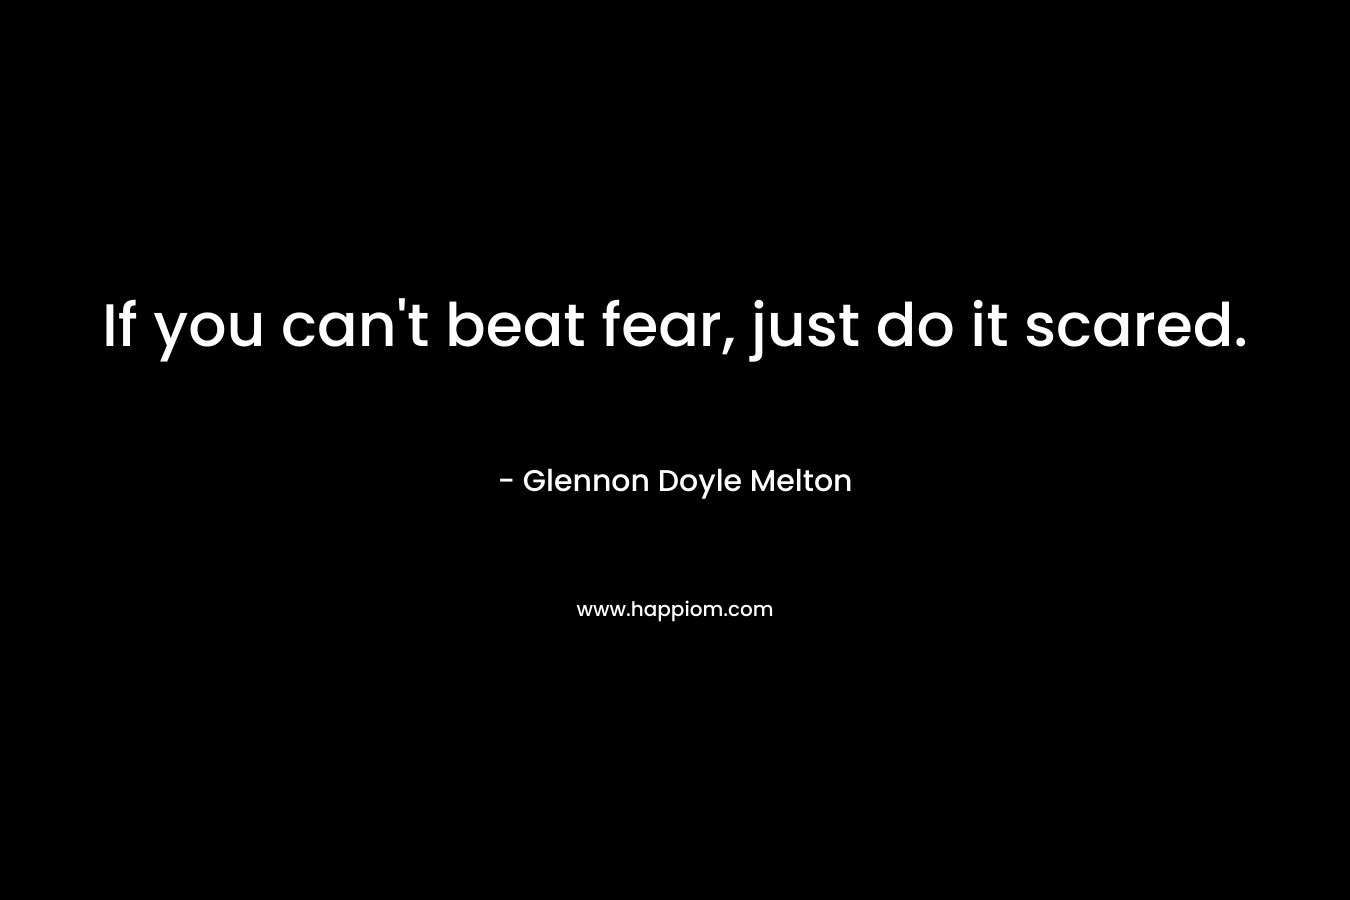 If you can't beat fear, just do it scared.